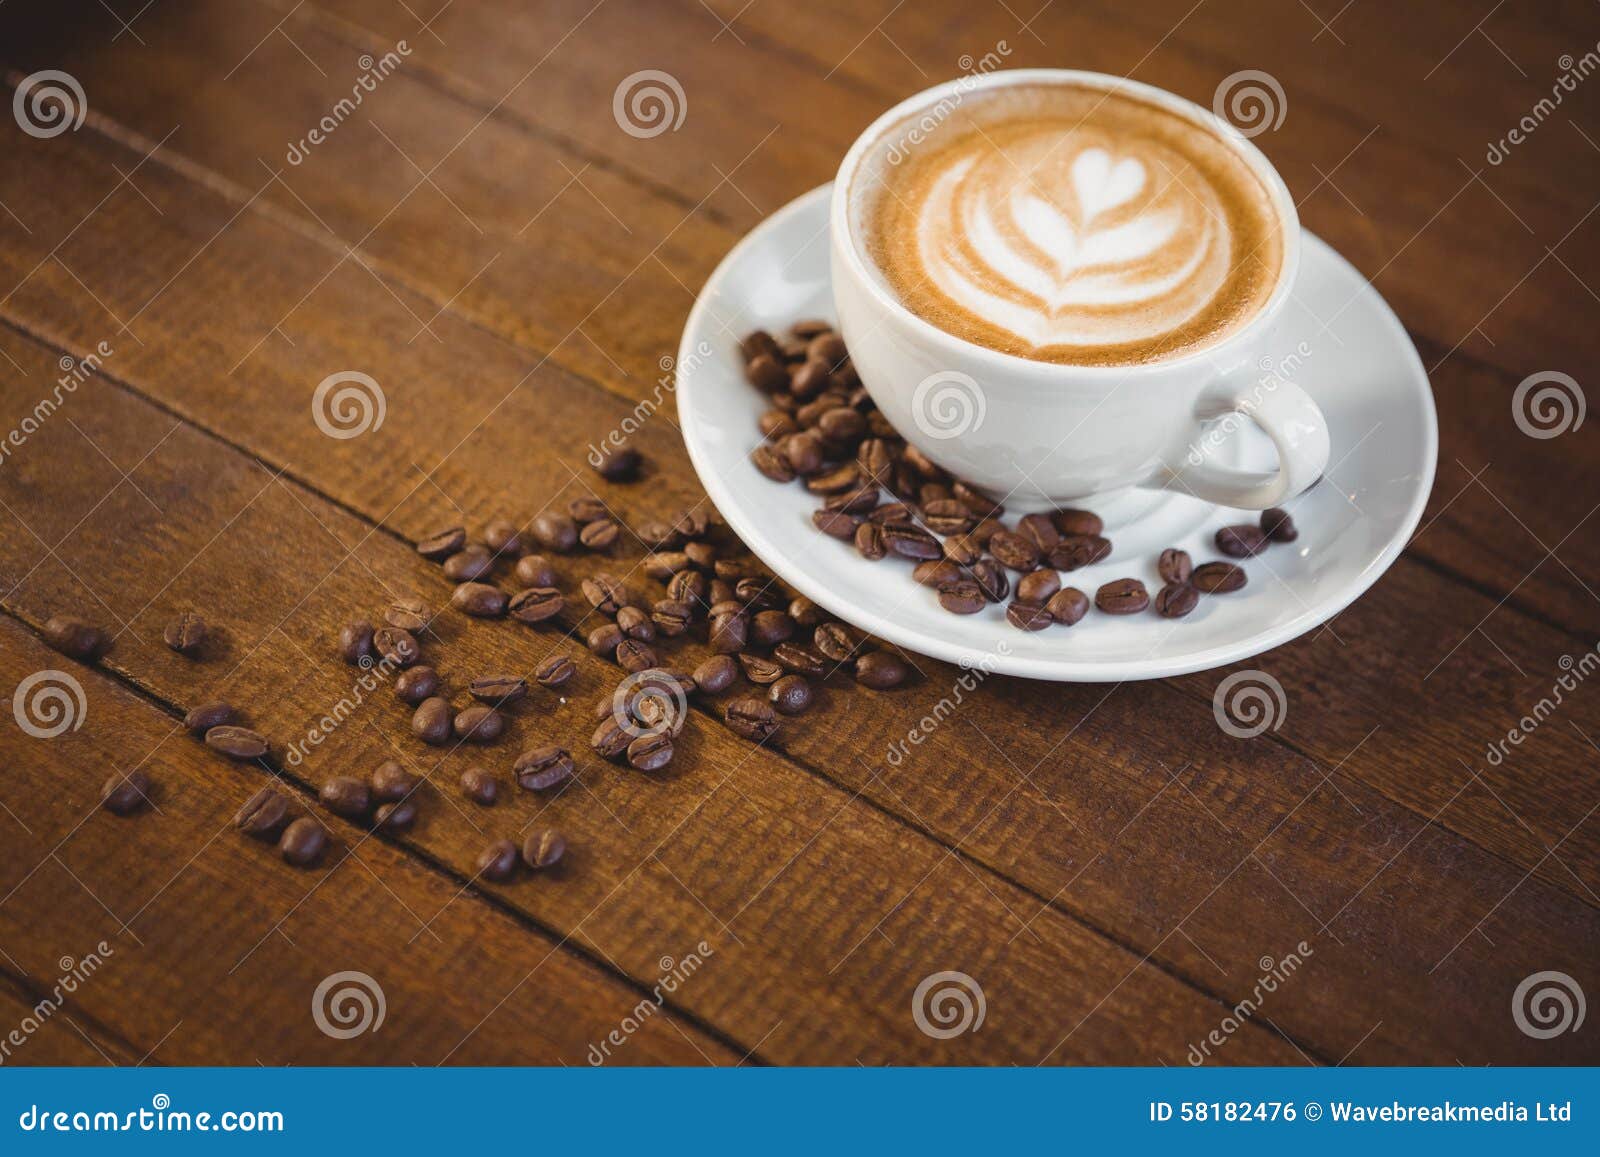 cup of cappuccino with coffee art and coffee beans